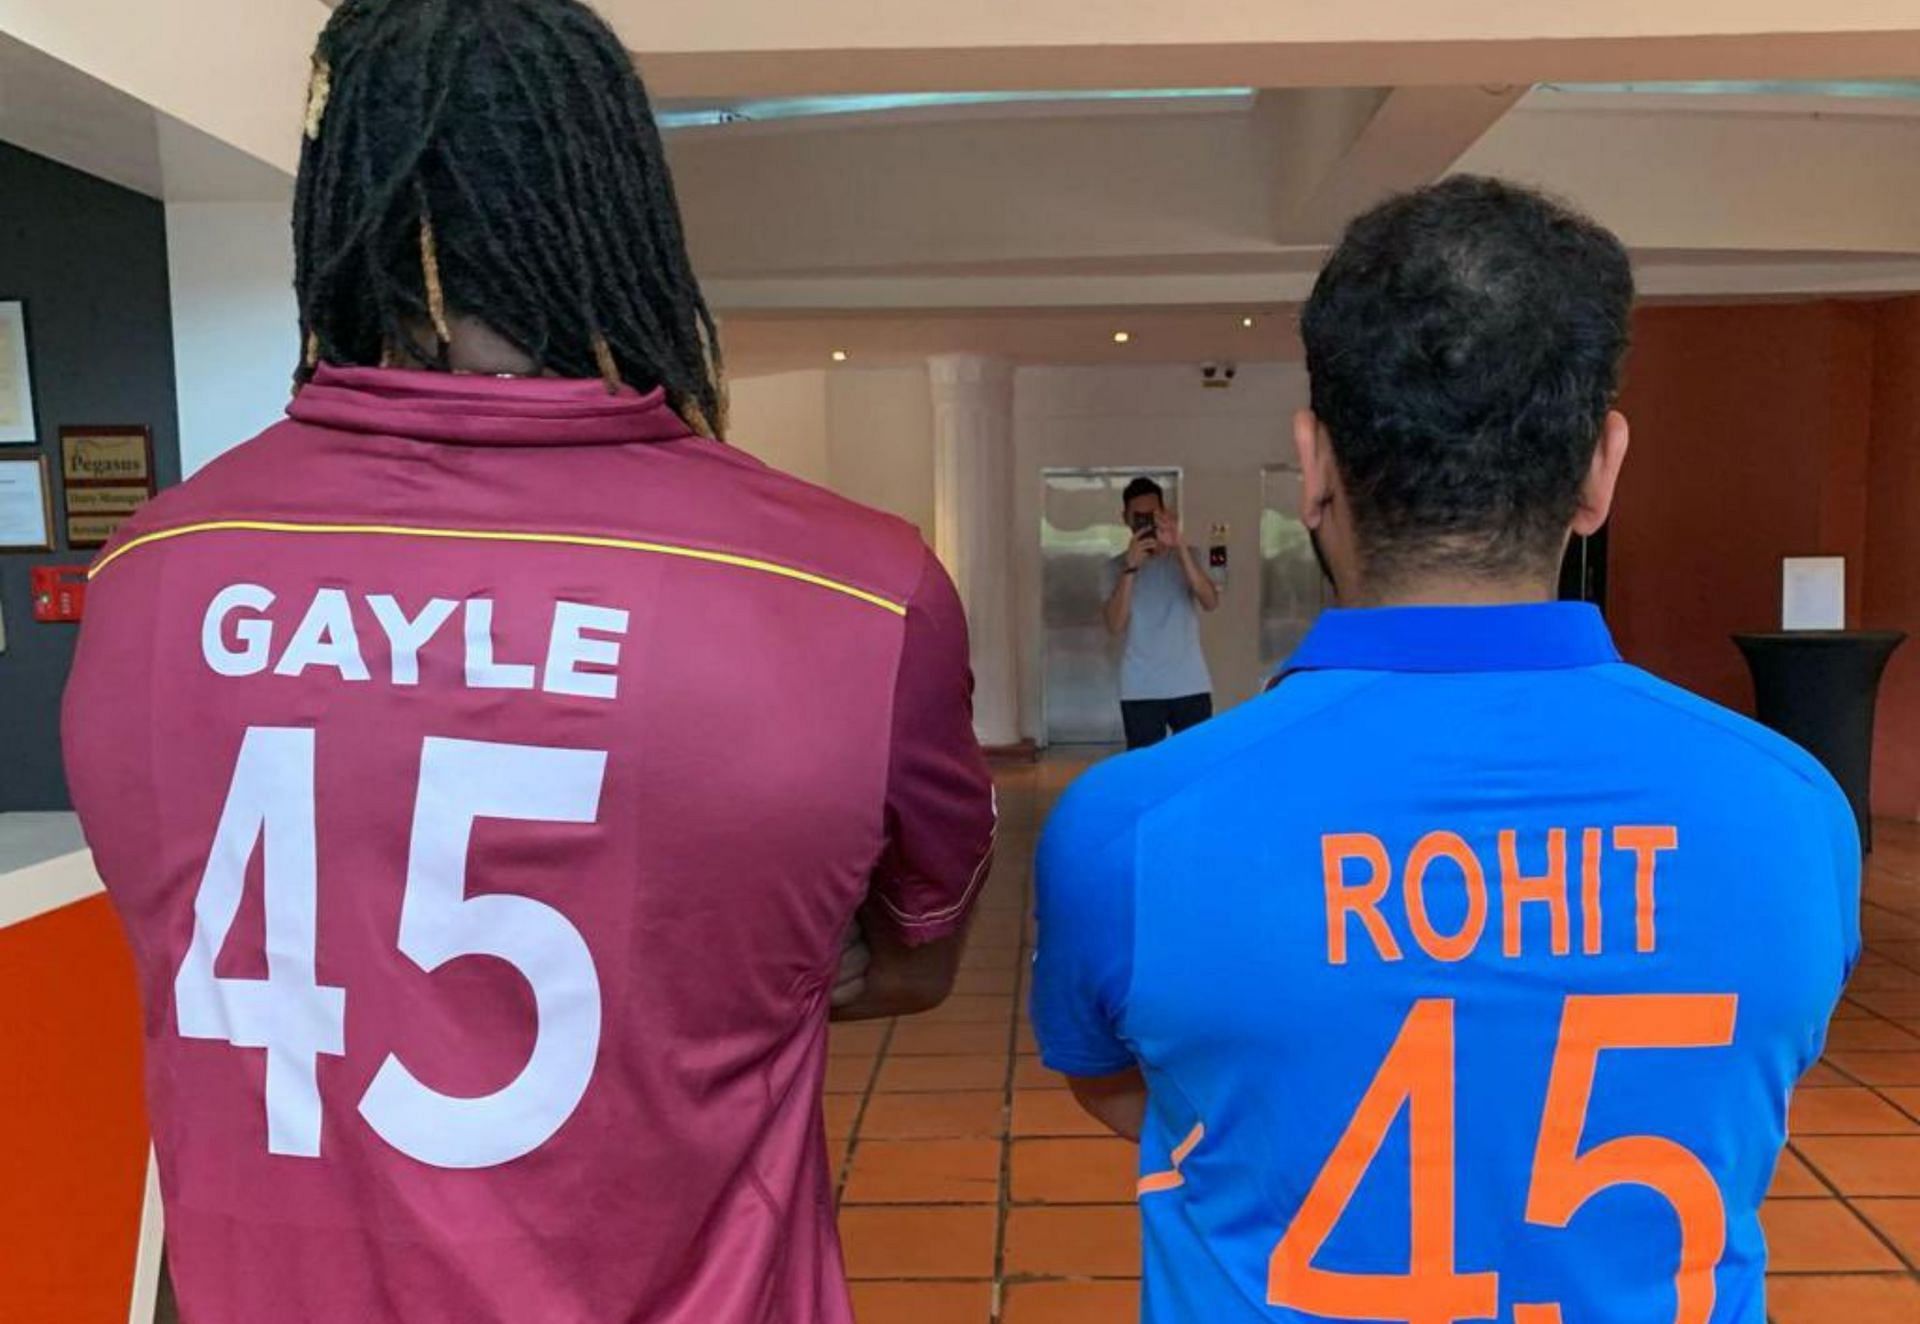 Chris Gayle (l) and Rohit Sharma (r).